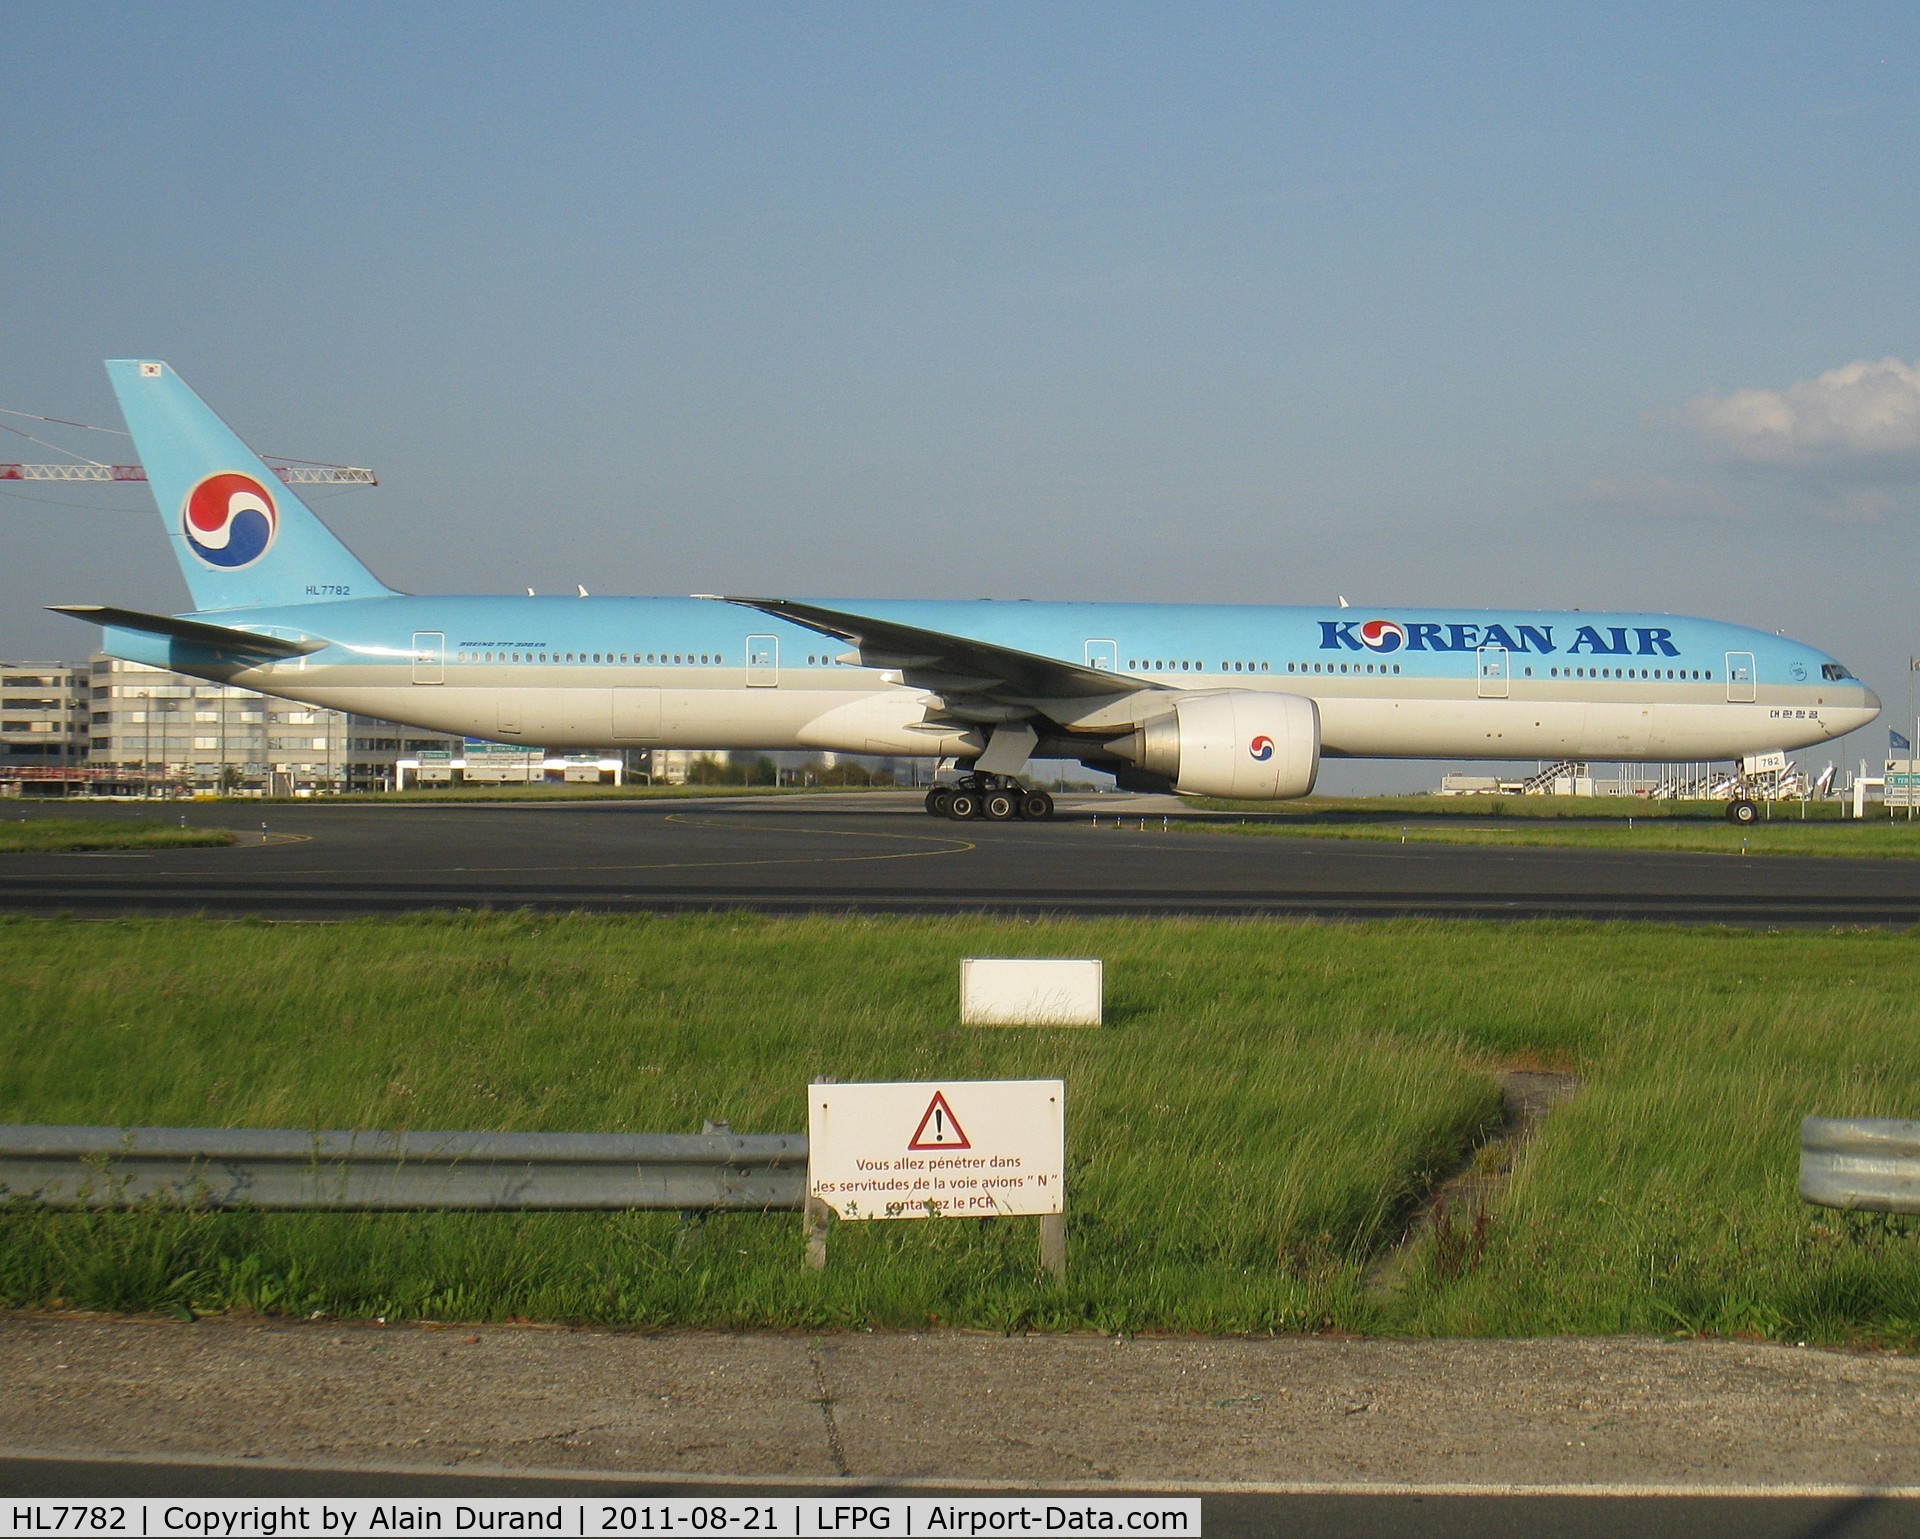 HL7782, 2009 Boeing 777-3B5/ER C/N 37643, Korean Air has been serving CDG for decades and was one of the very last airlines of Asia to operate the passenger 747 on the route. The 744 in use for over 20 years recently surrendered to a mix of Triple 7s